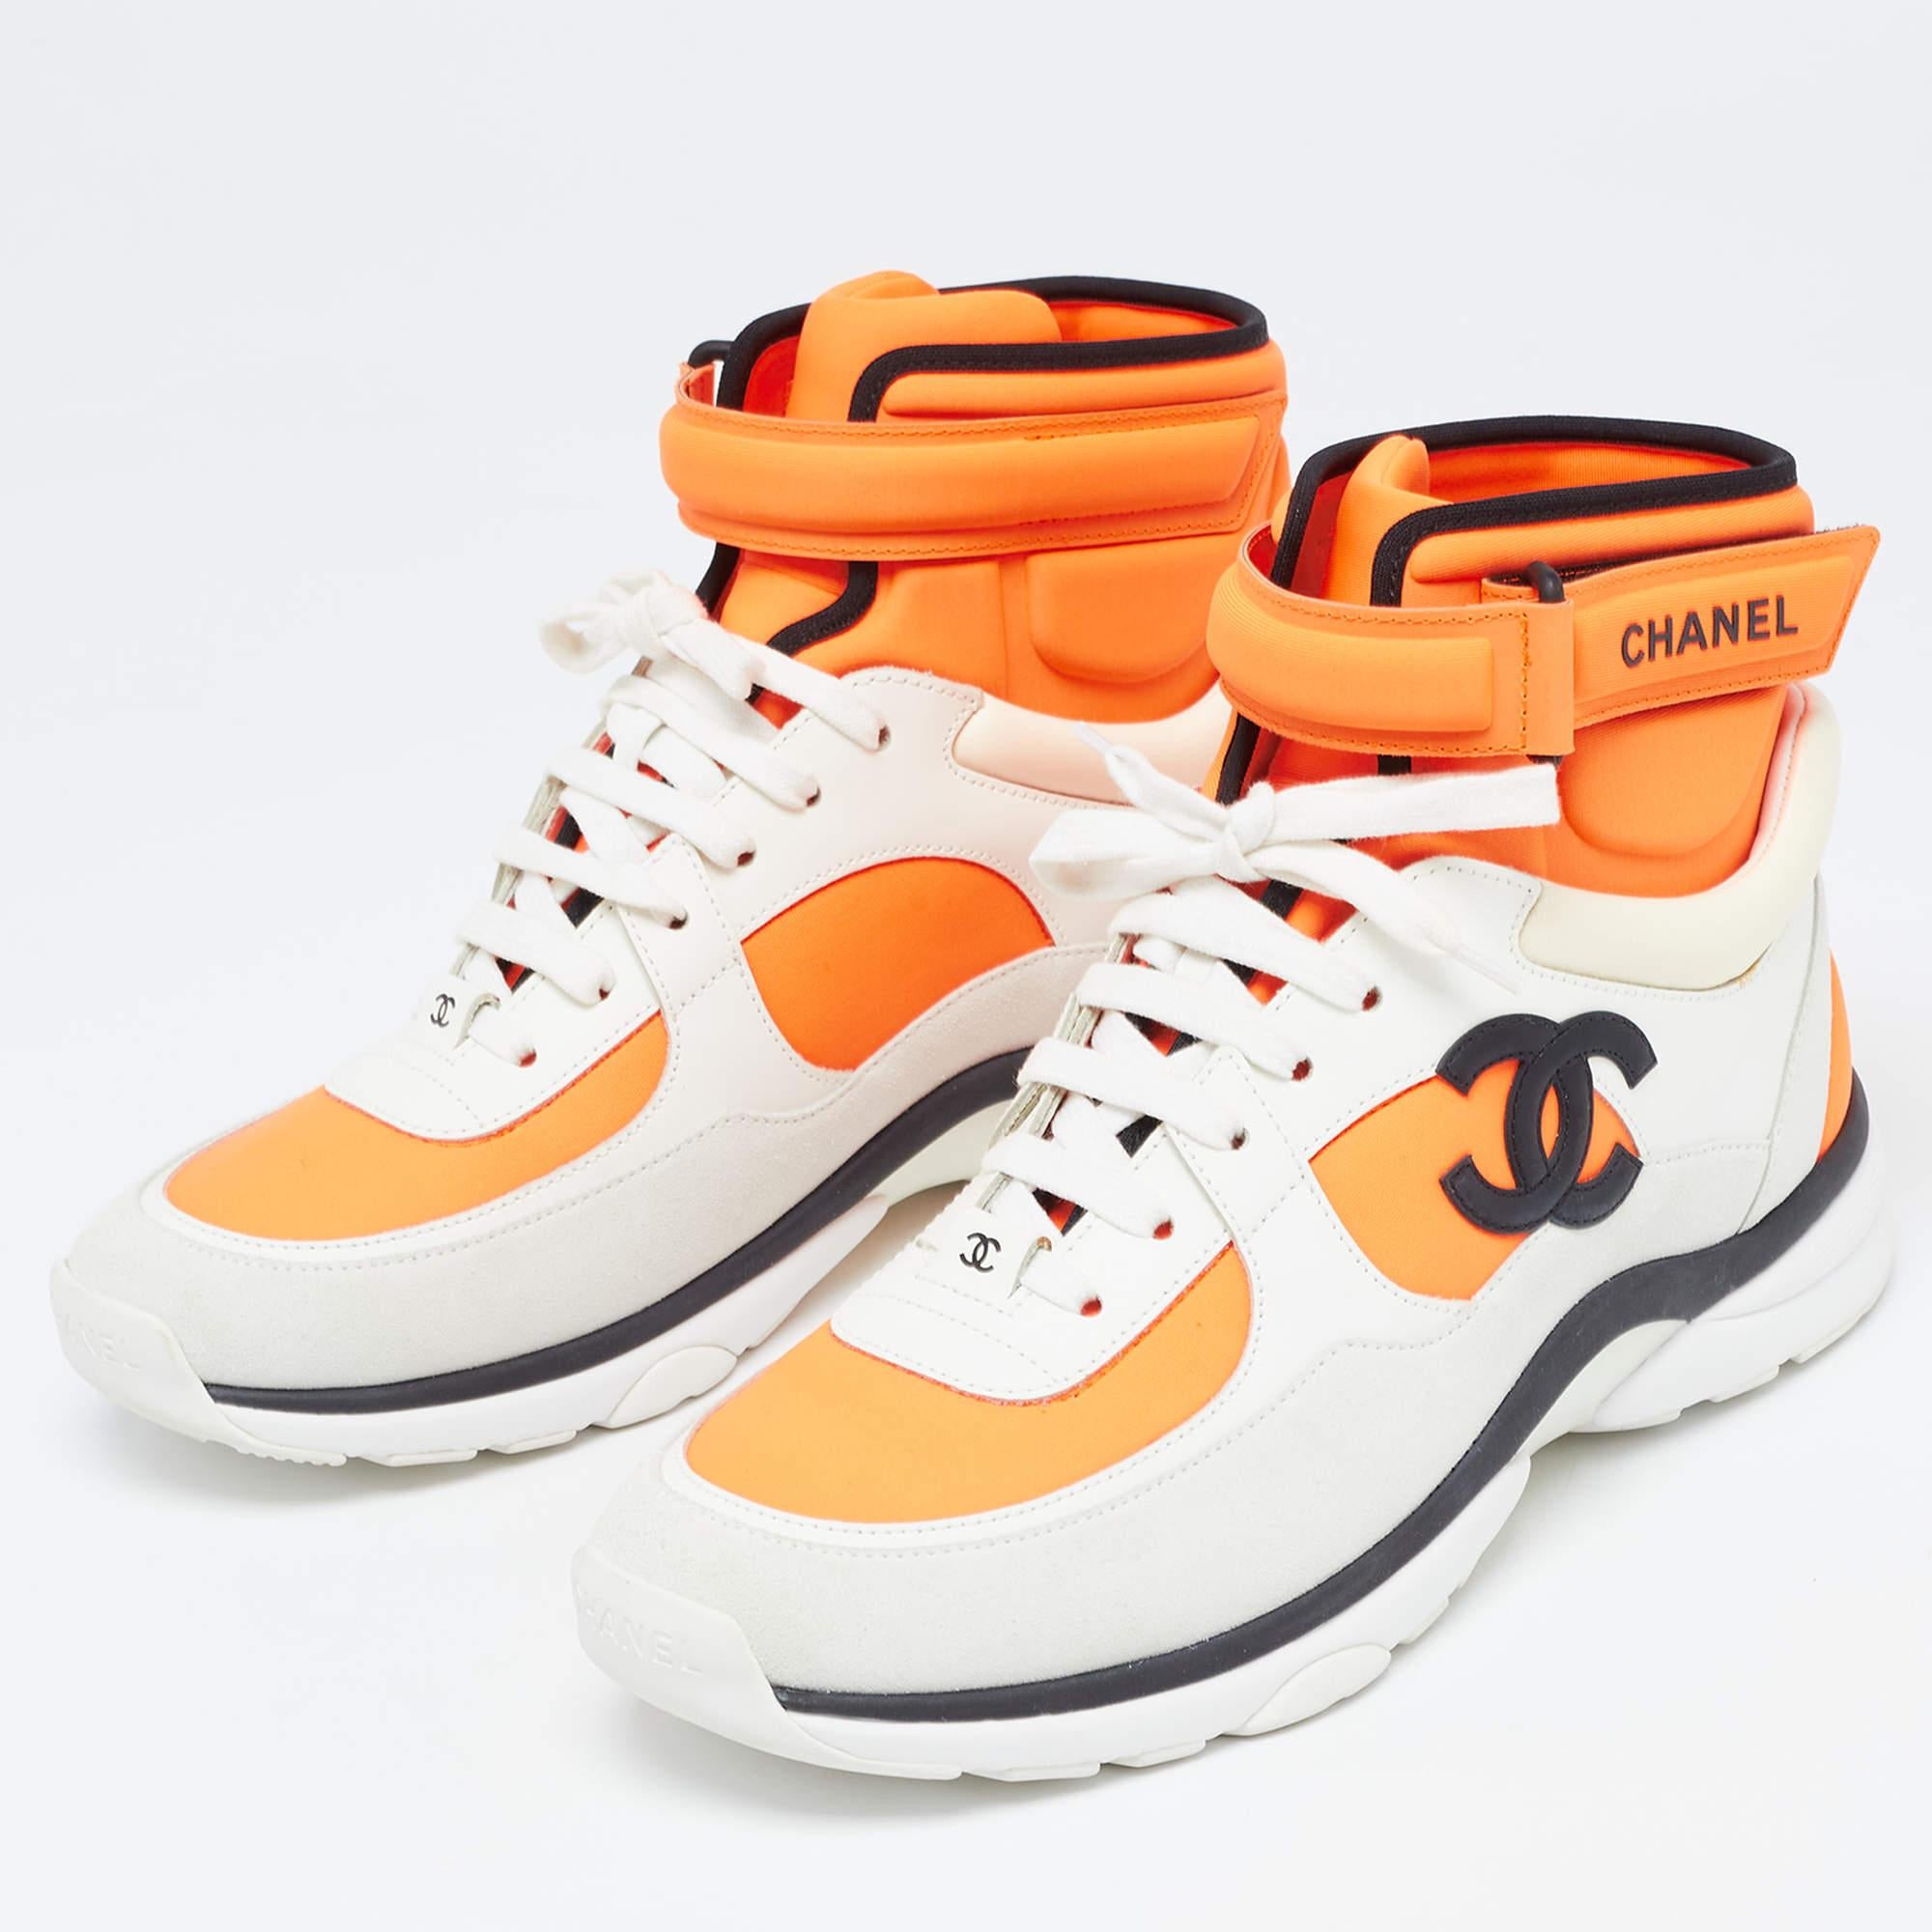 Chanel Neon Orange/White Neoprene and Leather CC High Top Sneakers Size 40.5 For Sale 4